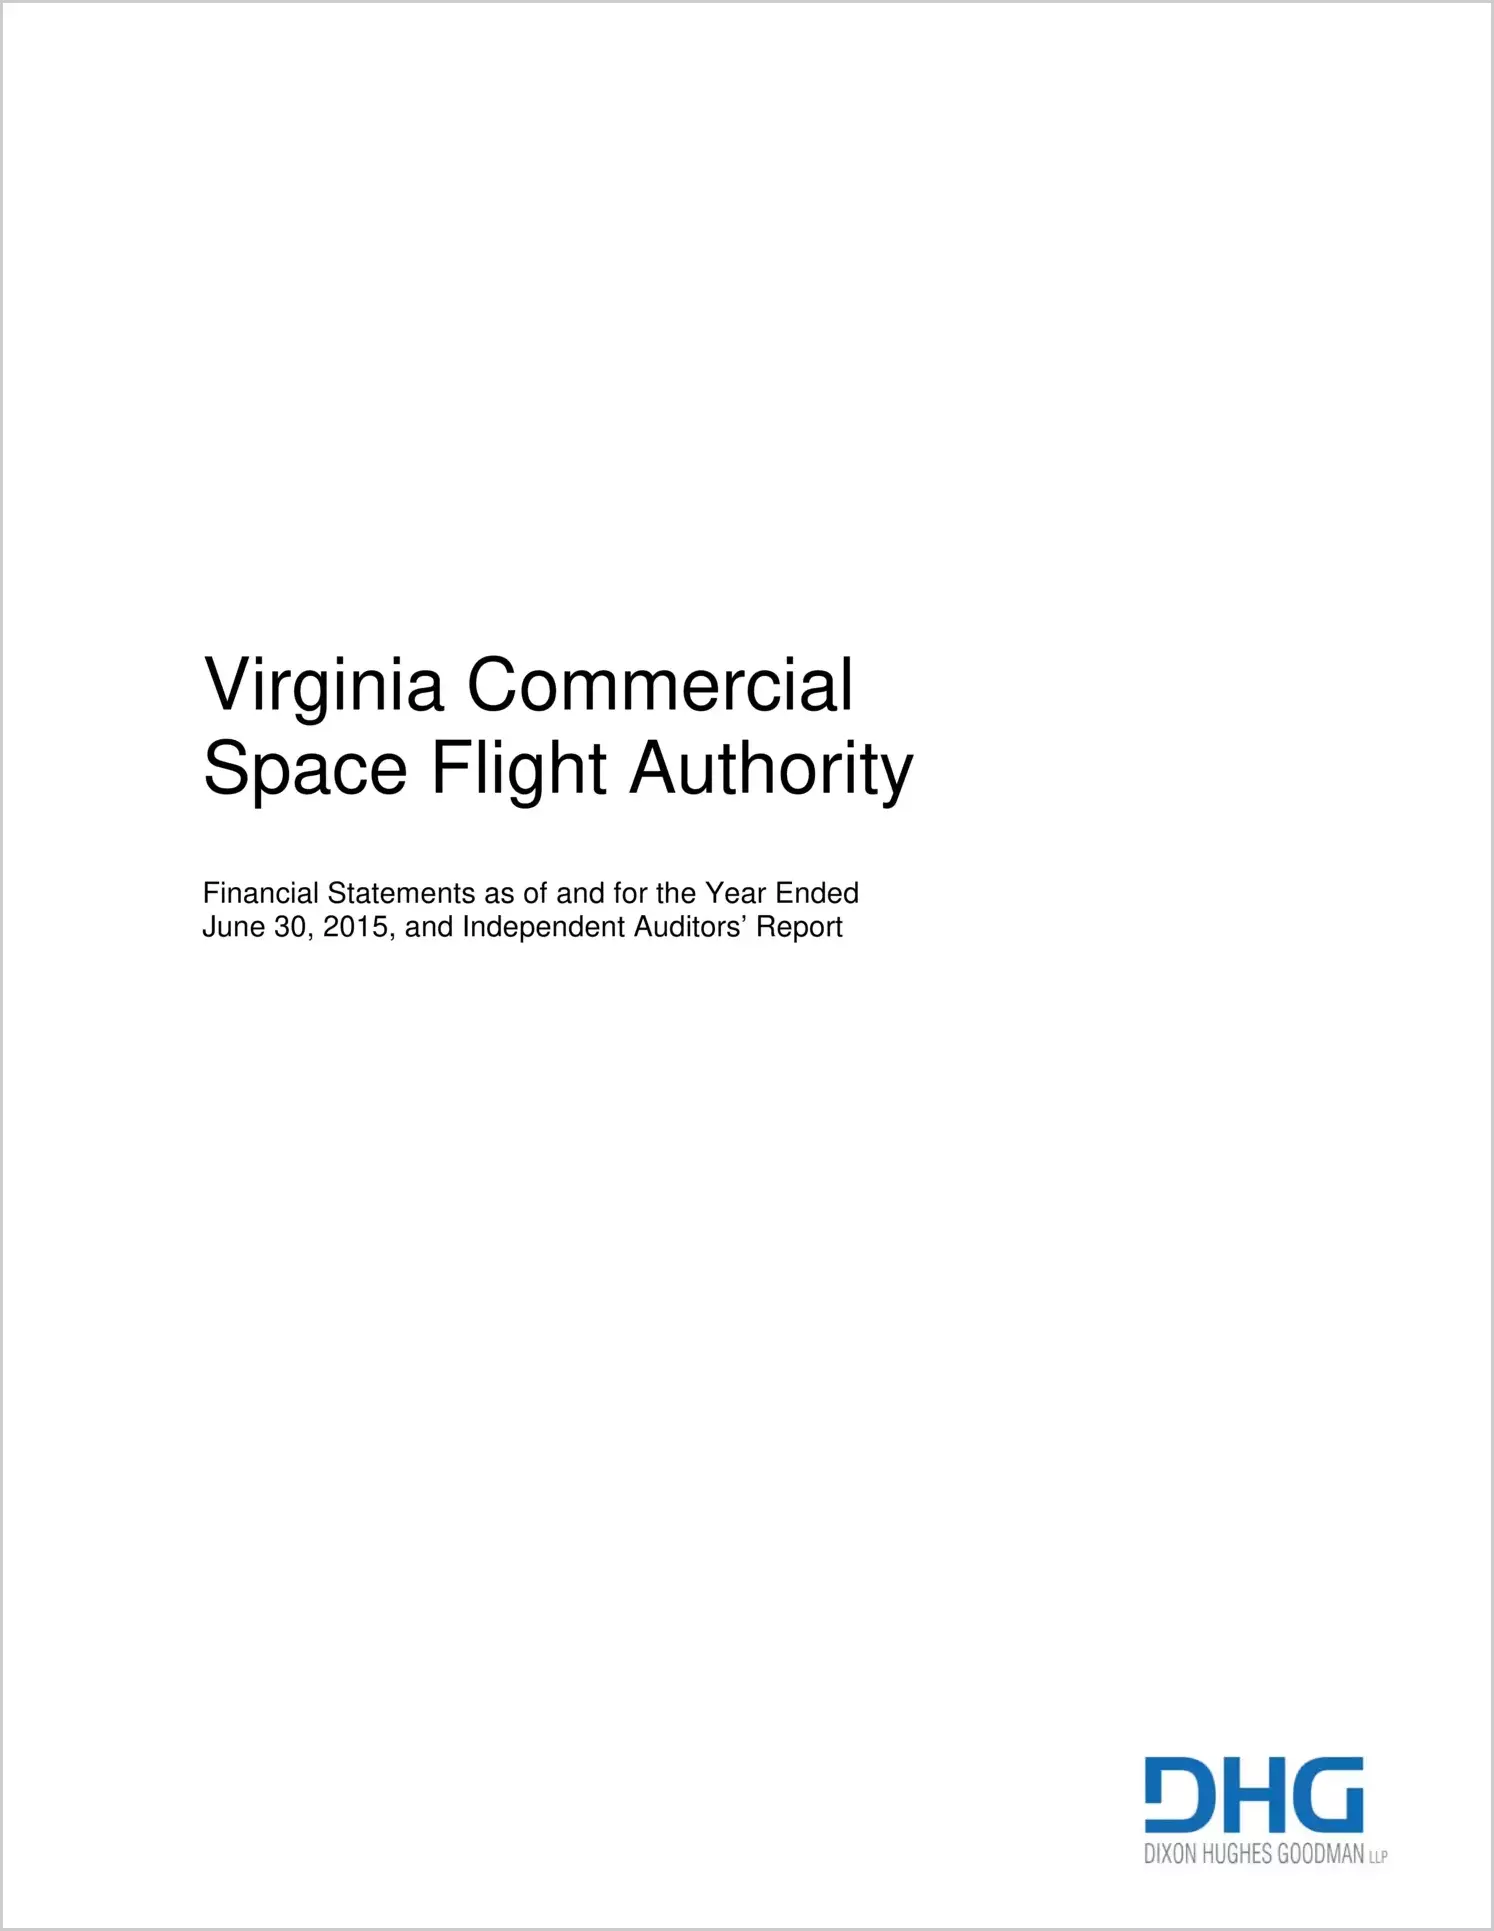 Virginia Commercial Space Flight Authority Financial Statements Report for the year ended June 30, 2015